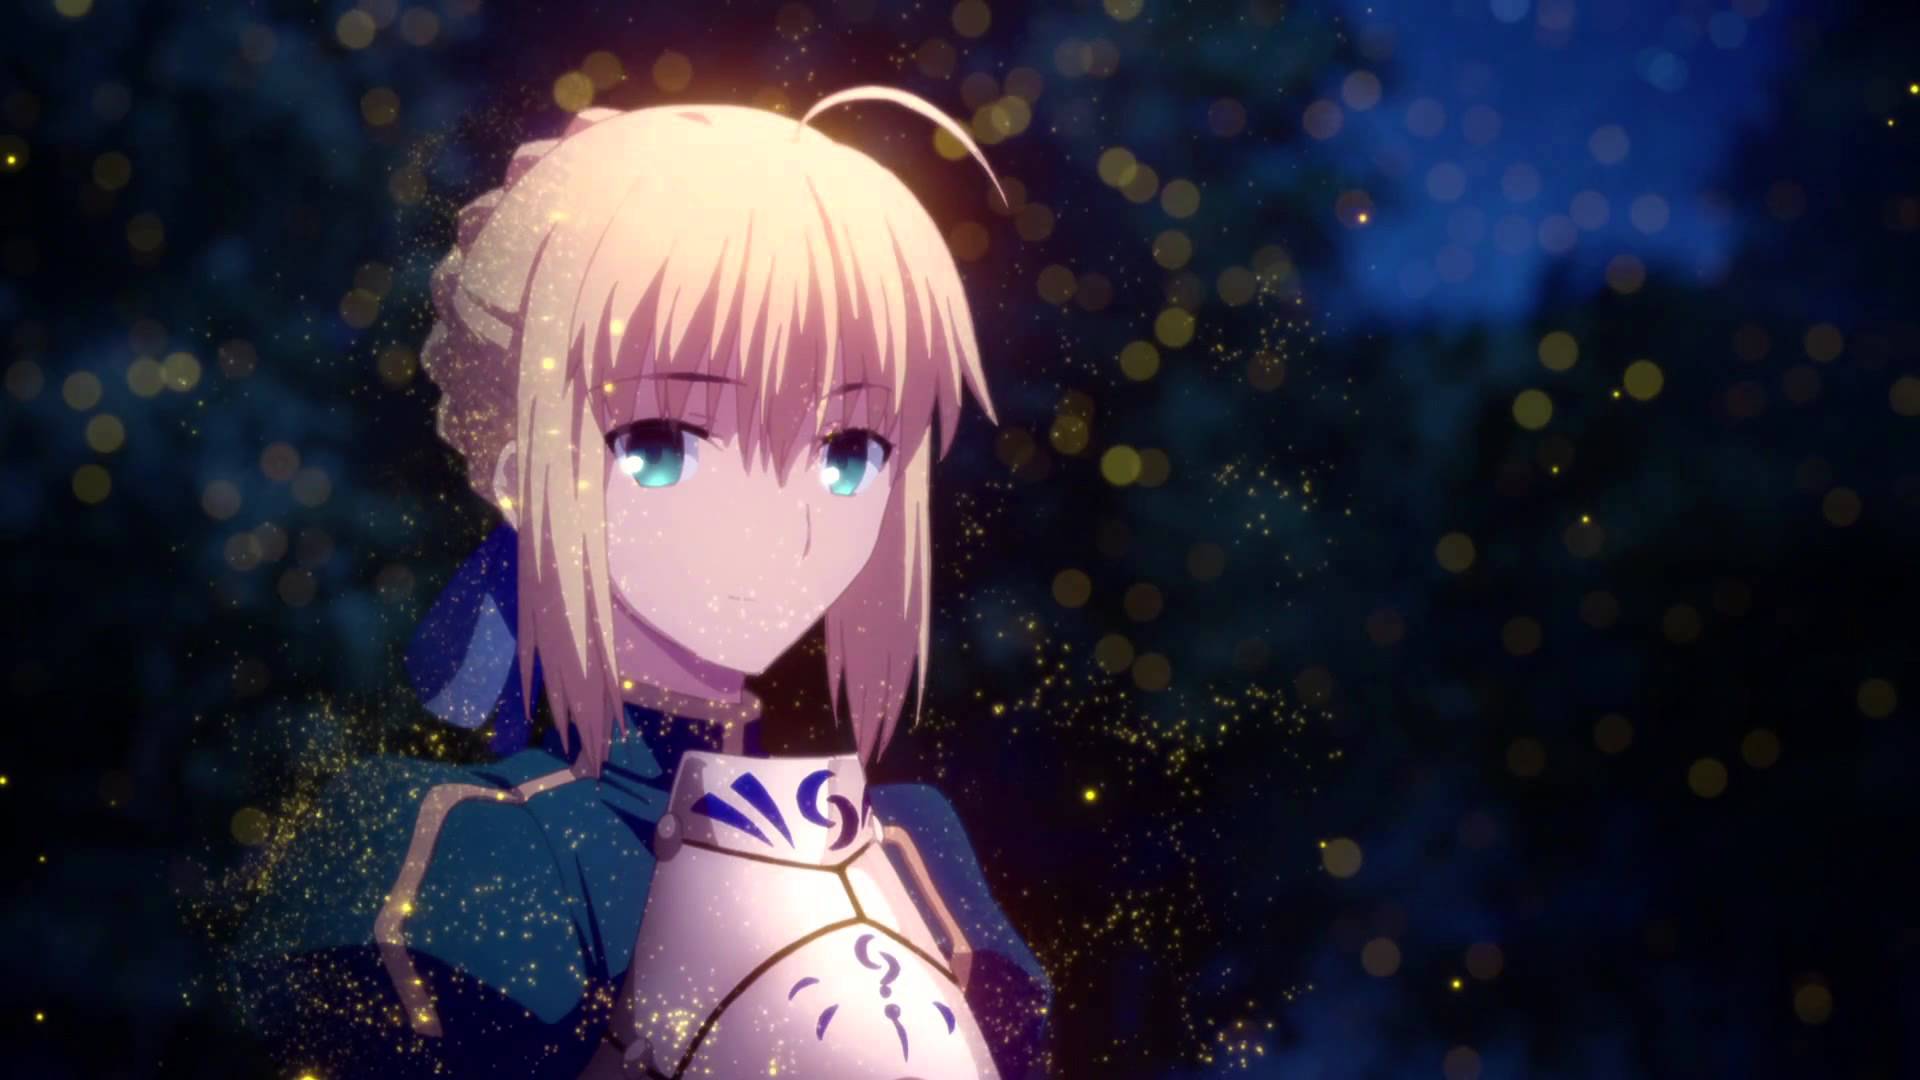 Fate/stay night: Unlimited Blade Works Sub Indo Episode 00-25 End + OVA BD